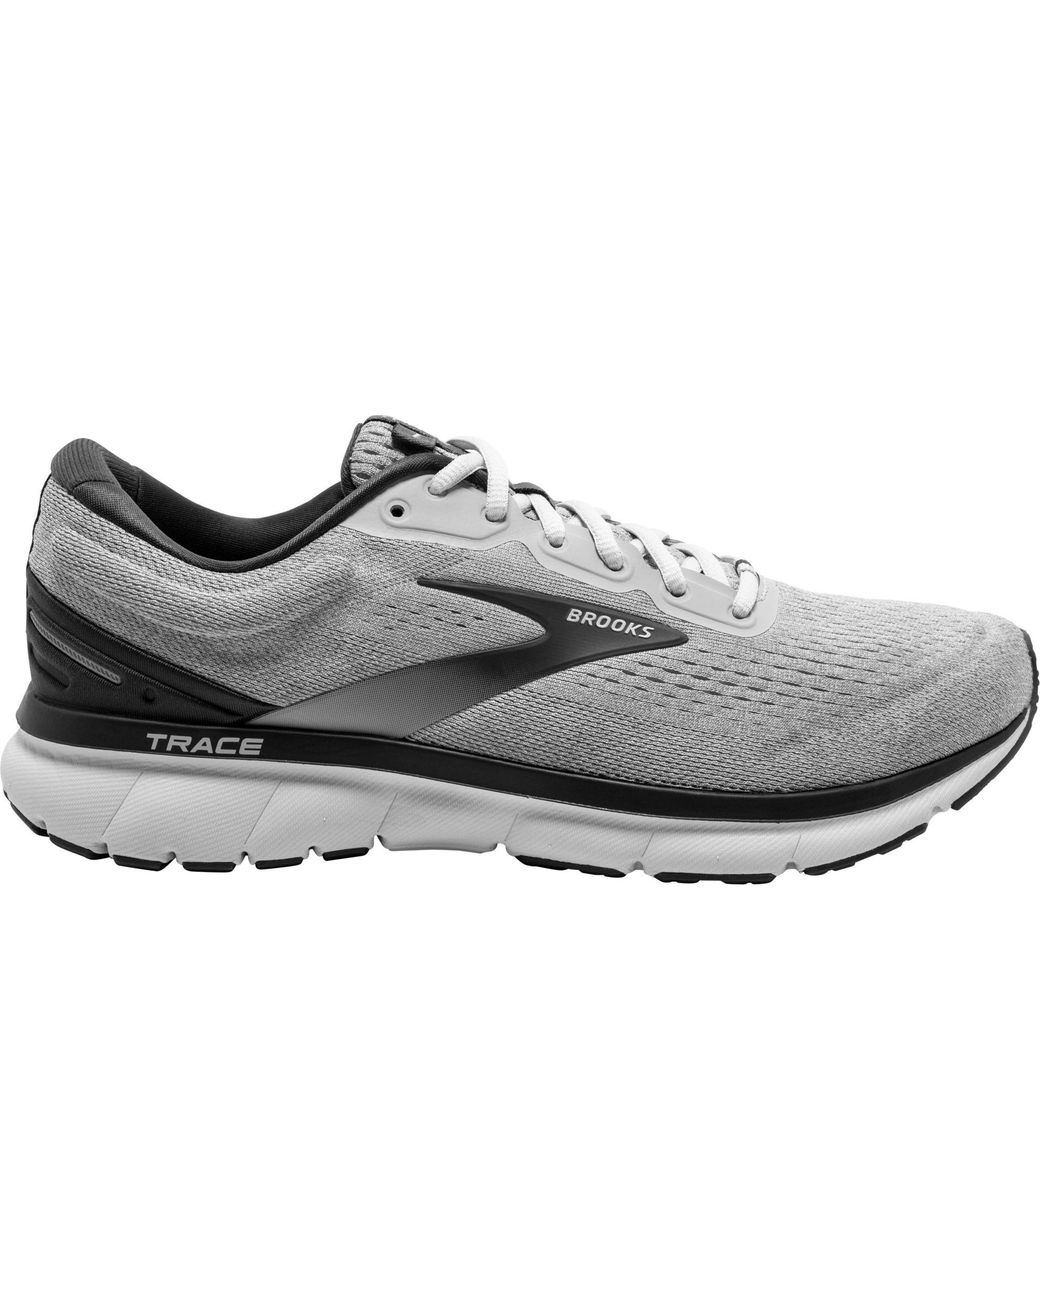 Brooks Trace Running Shoes in Grey (Gray) for Men - Lyst